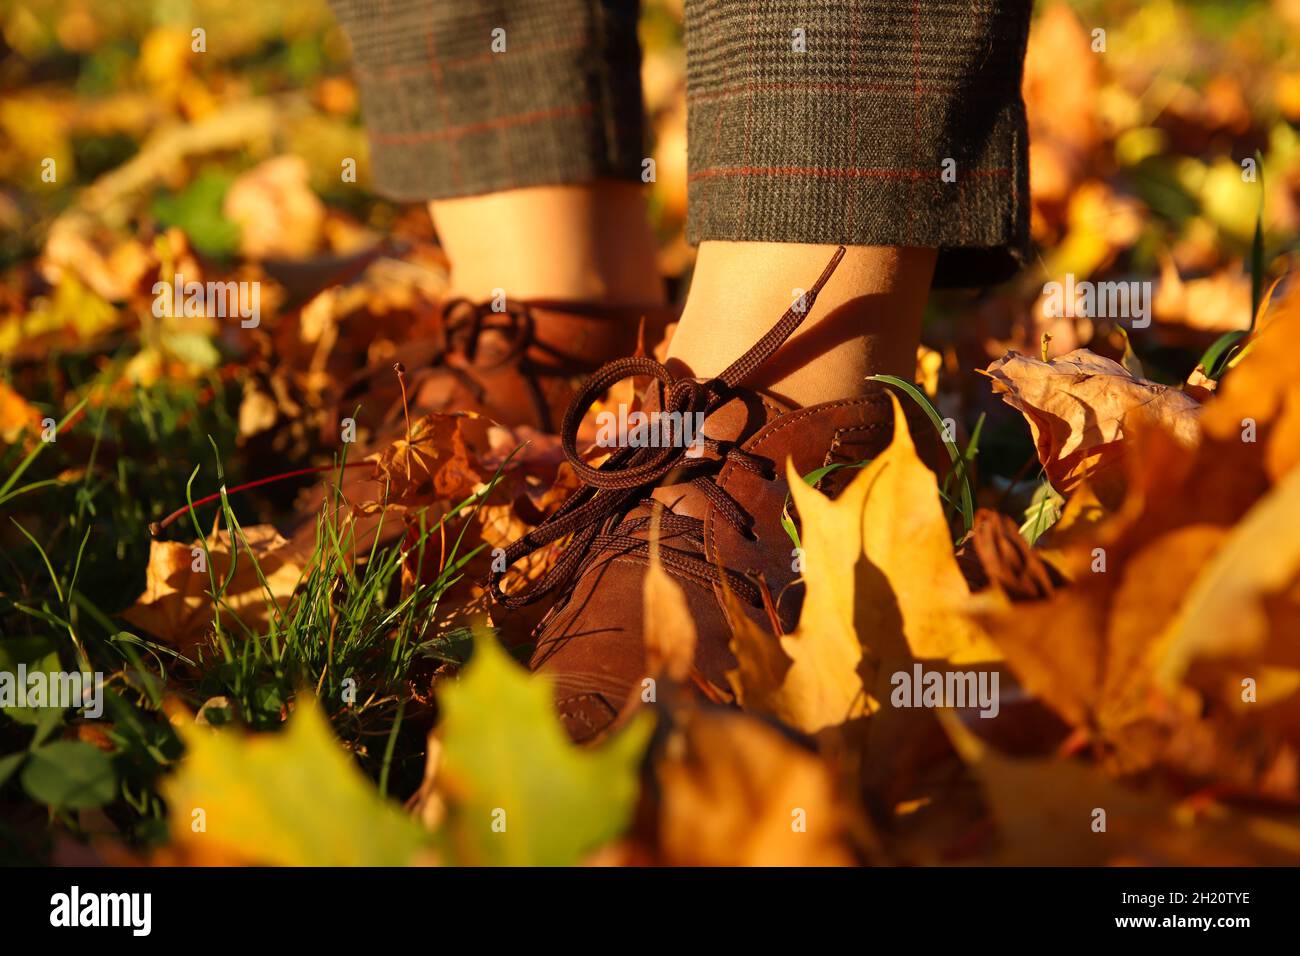 https://c8.alamy.com/comp/2H20TYE/close-up-female-foot-in-capri-pants-and-brogues-shoes-on-dry-autumn-bright-leaves-background-bright-stylish-woman-in-orange-coat-walking-in-october-2H20TYE.jpg